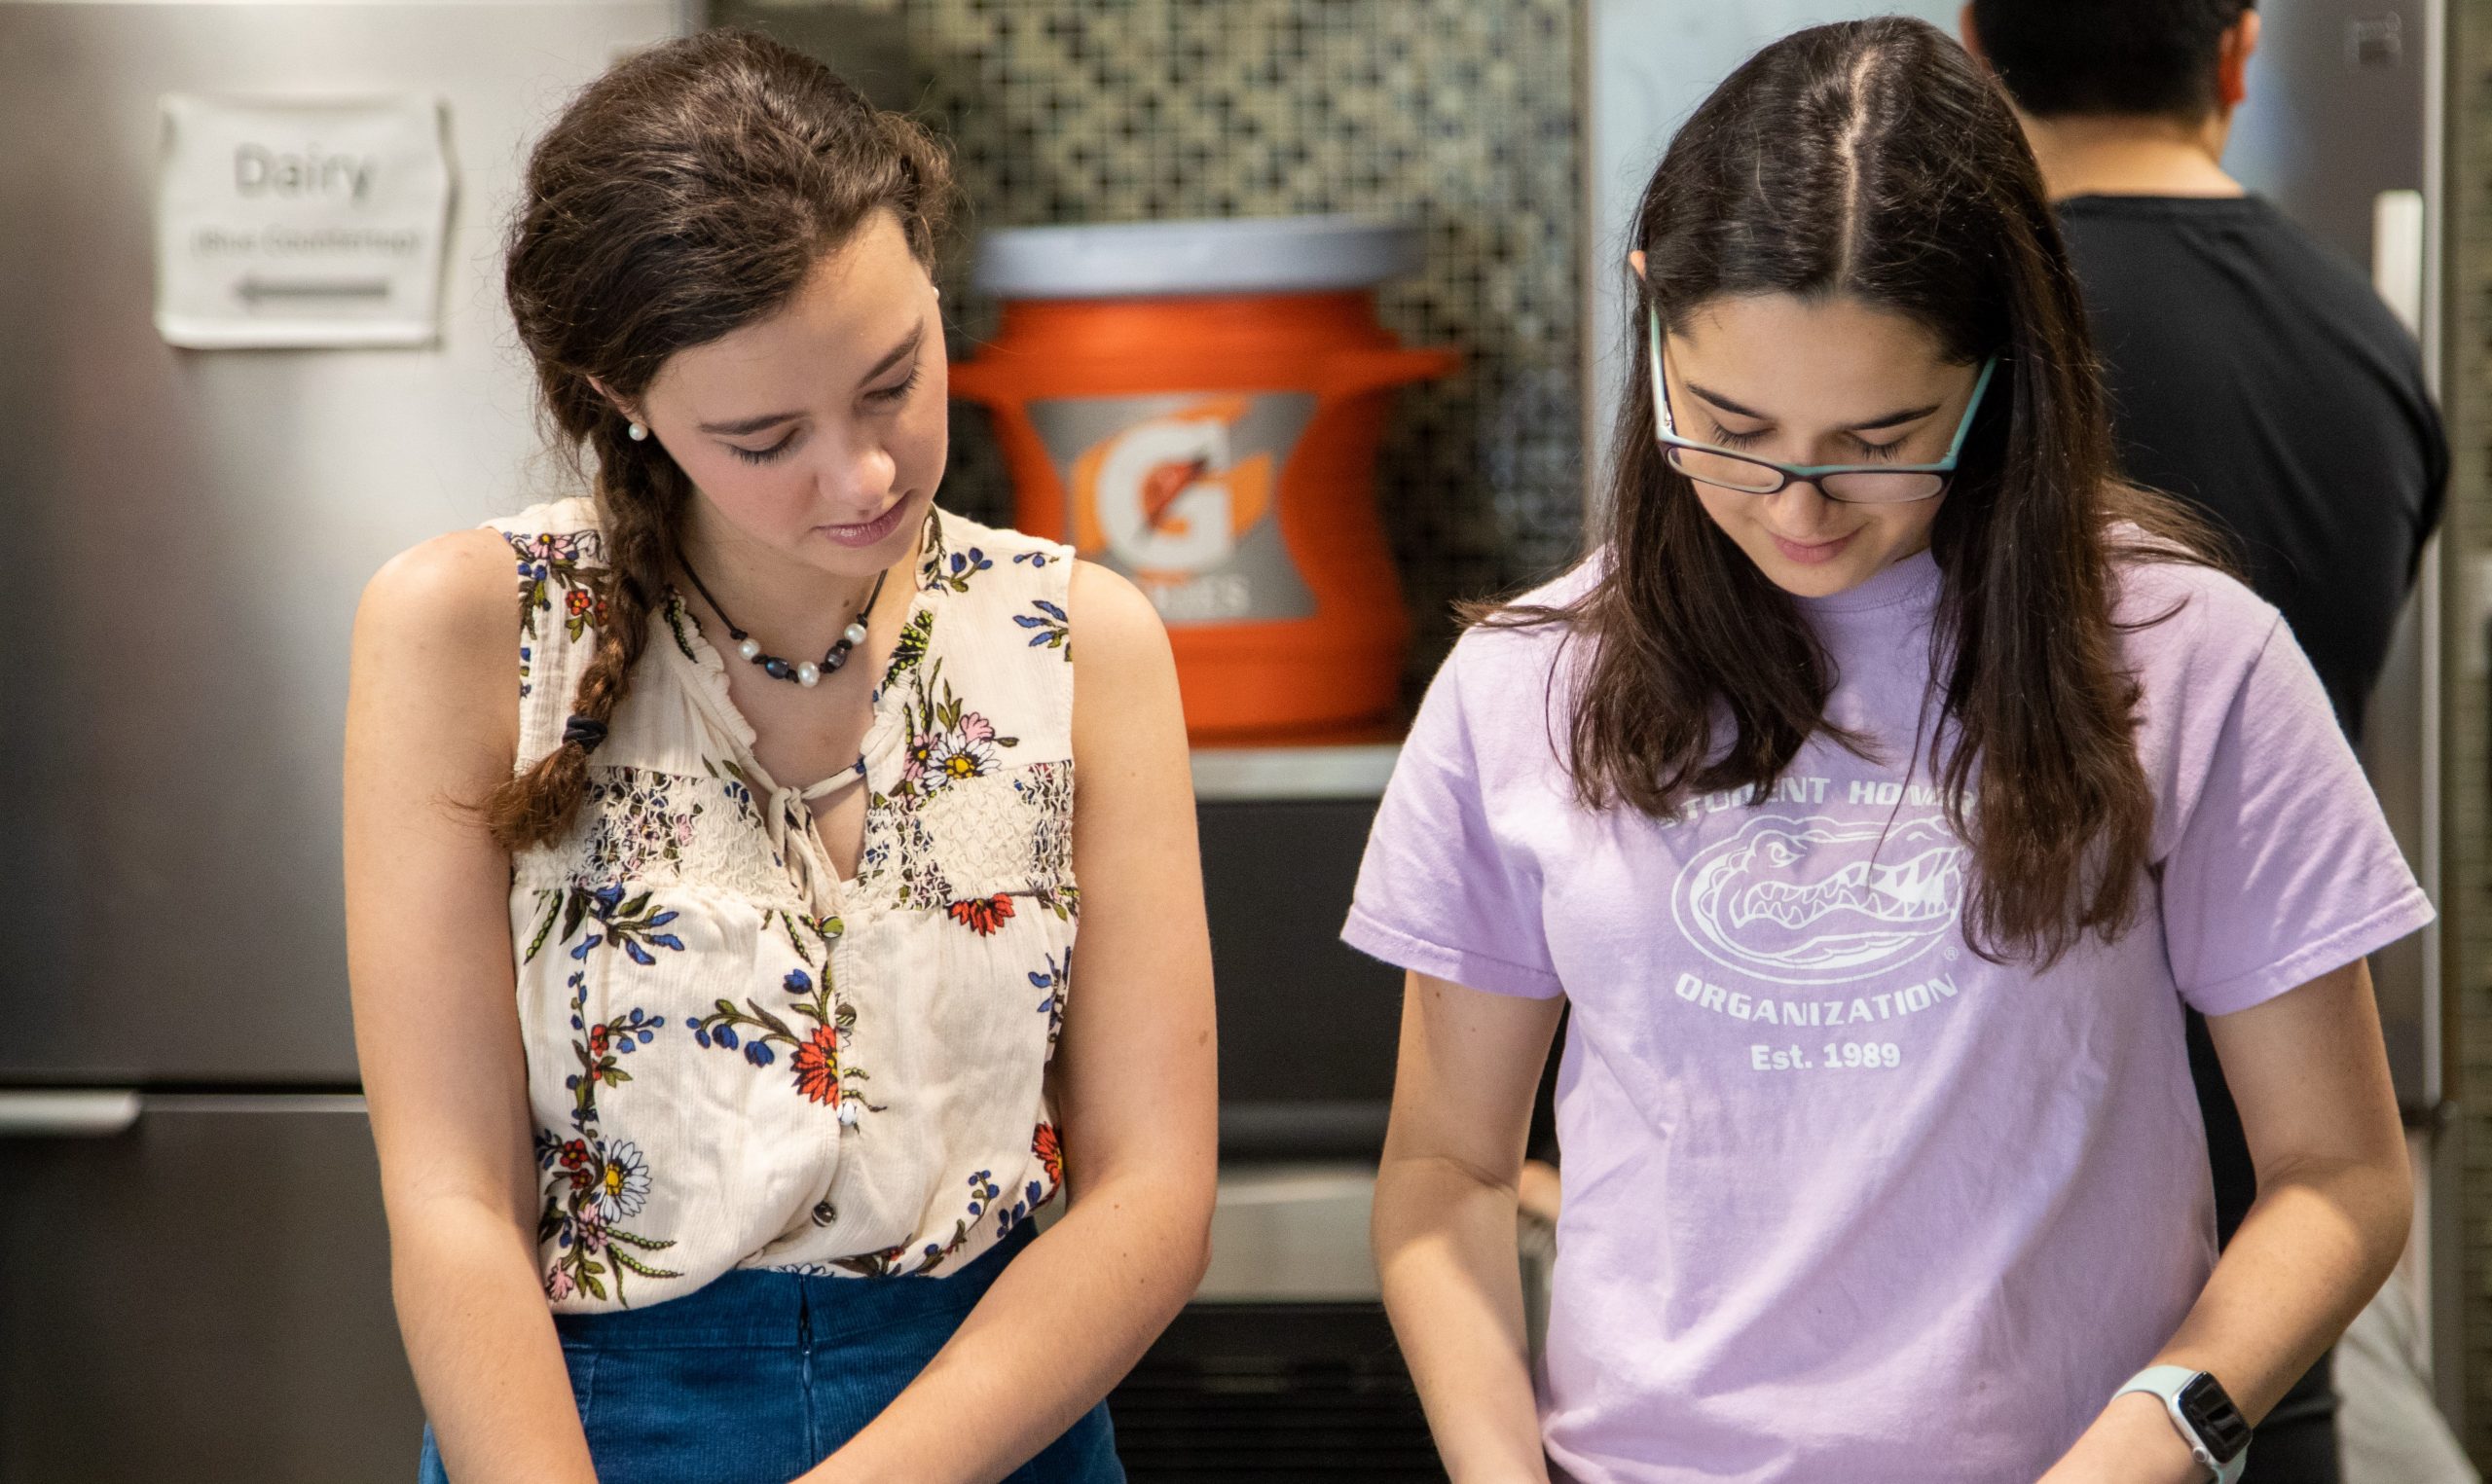 Two students try baking together.